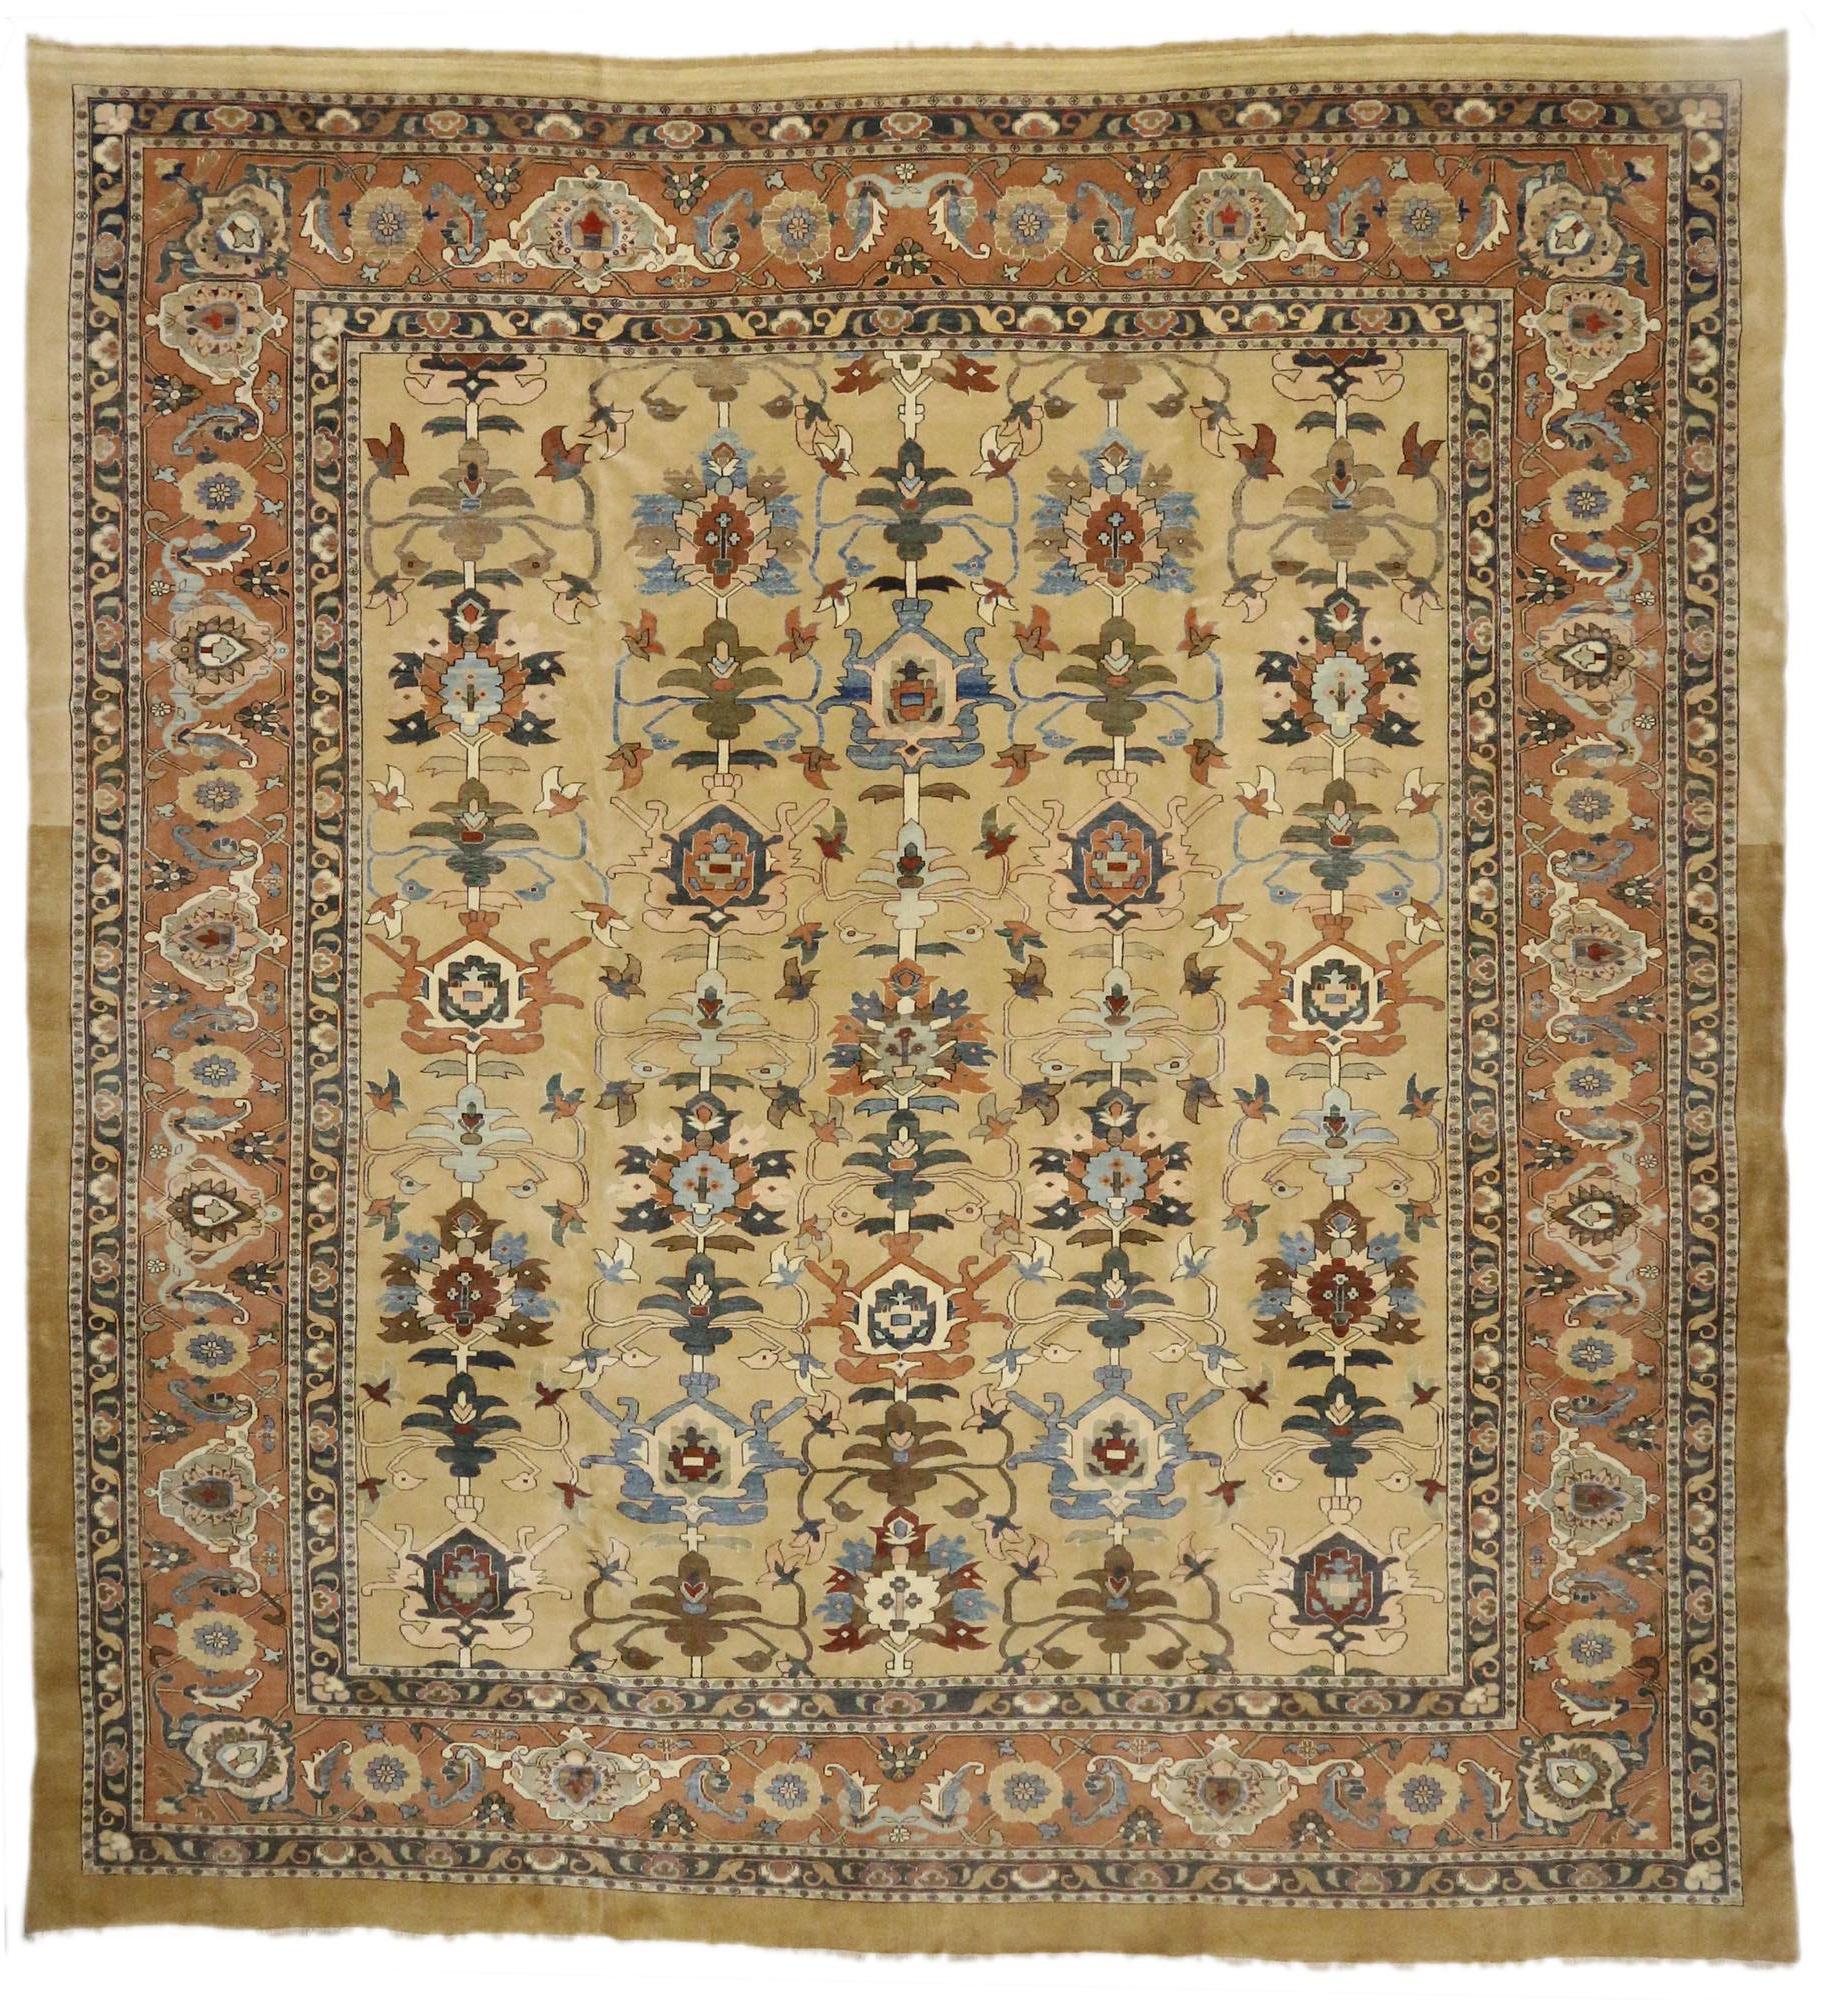 ​​73419 Vintage Persian Sultanabad Palace Size Rug with Warm Tuscan Italian Style 16'04 x 17'08. With its timeless design and warm earthy hues, this hand-knotted wool vintage Persian Sultanabad palace rug beautifully embodies a Tuscan Italian style.